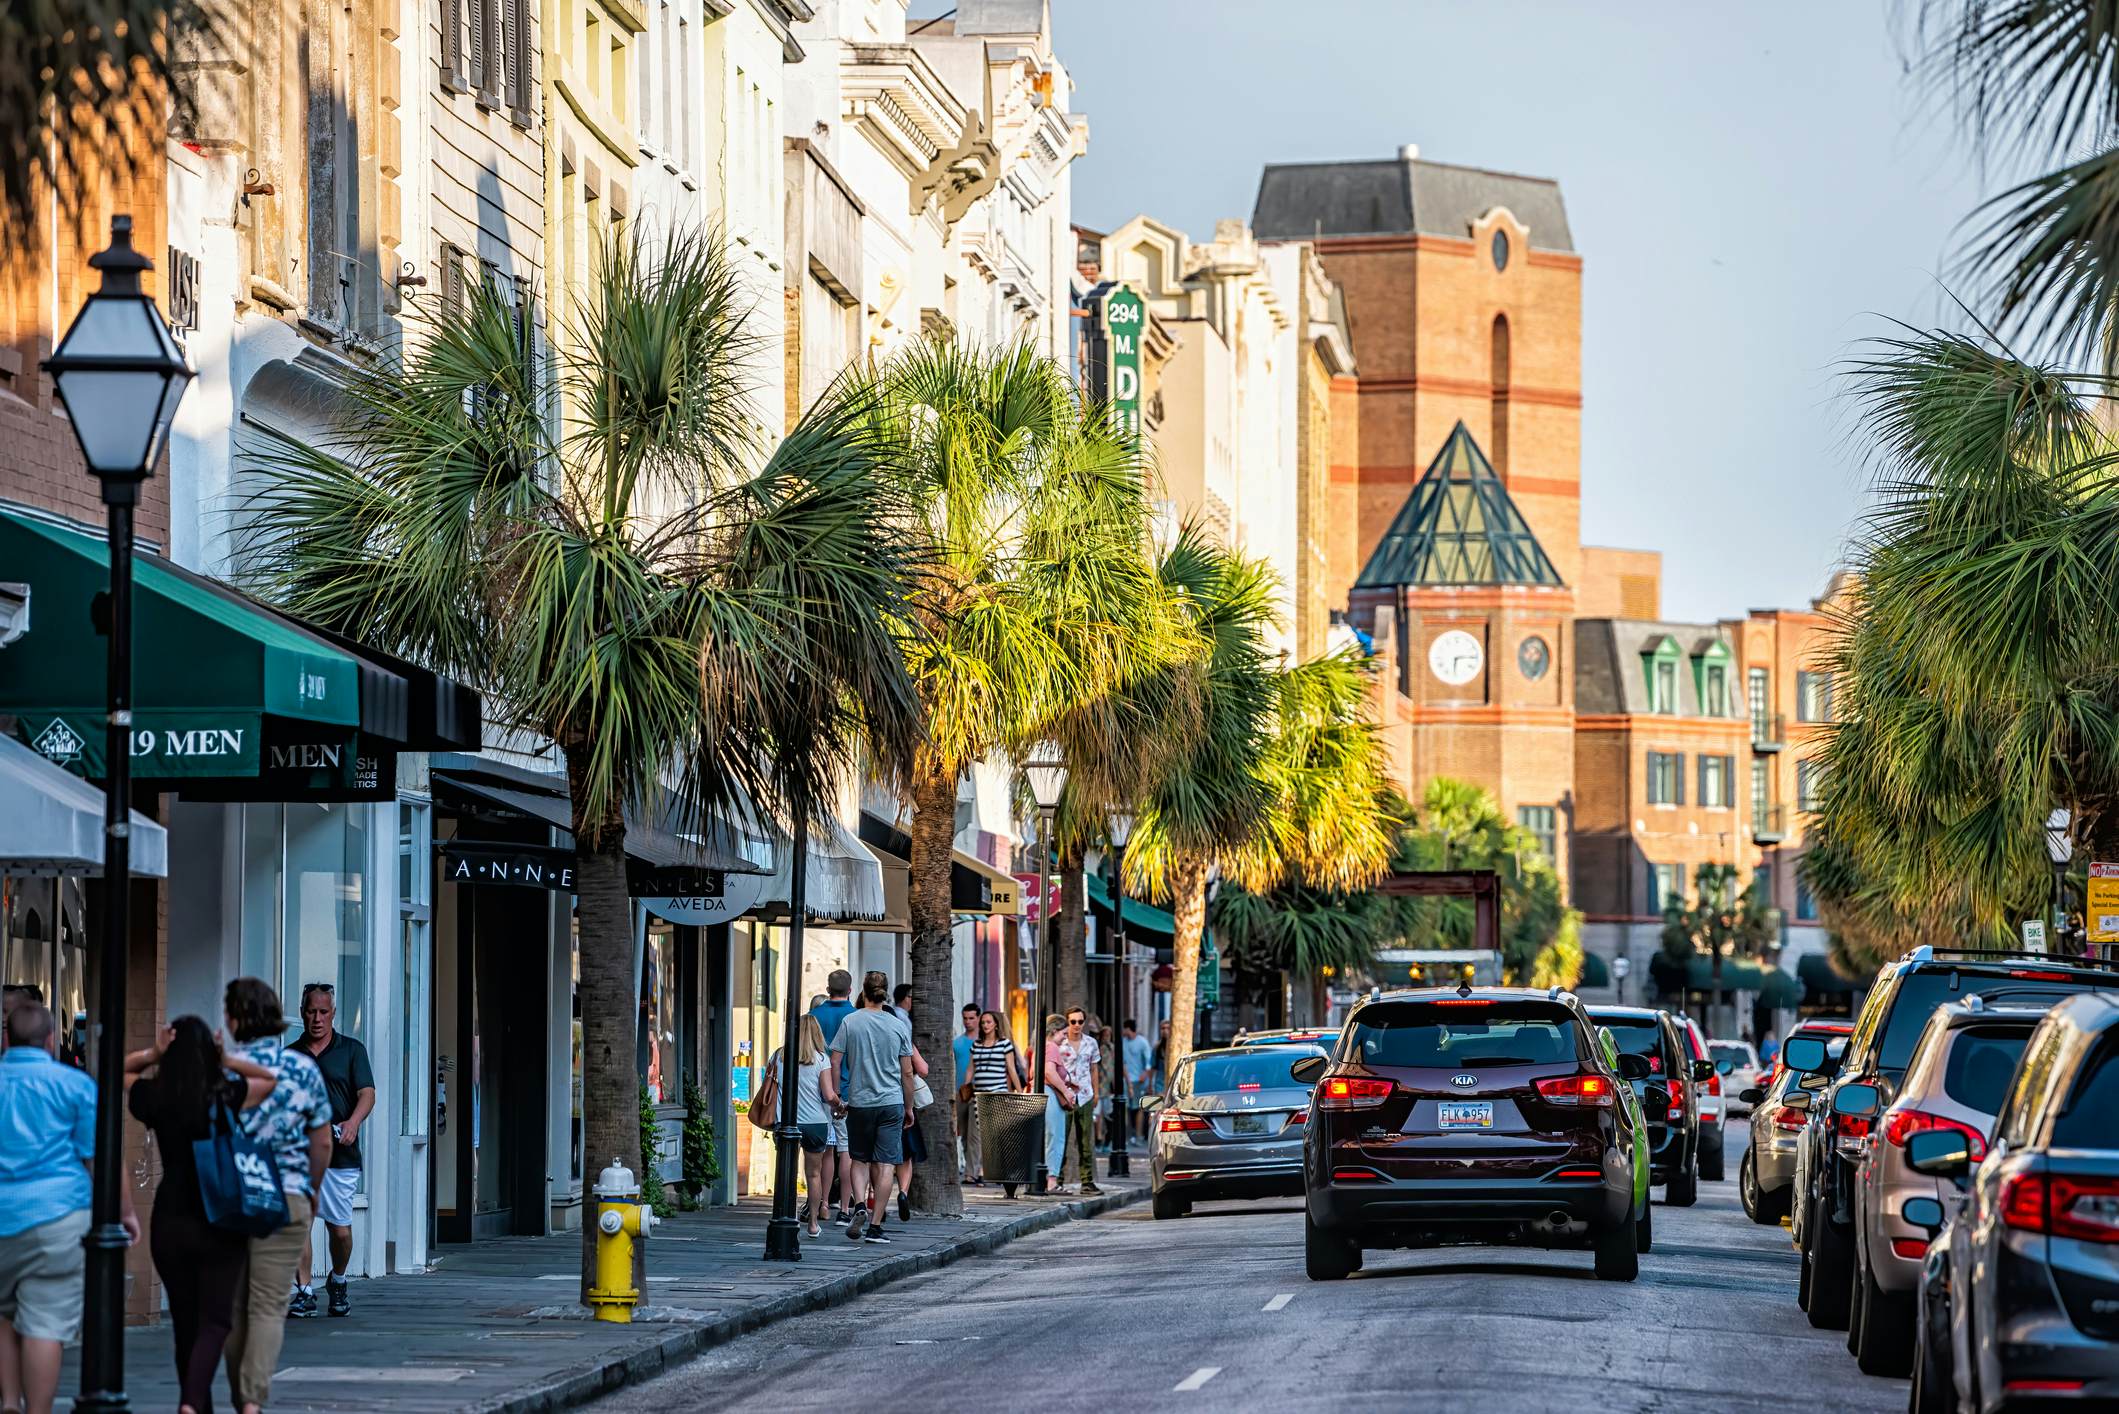 Best Things to Do in Charleston with City Experiences